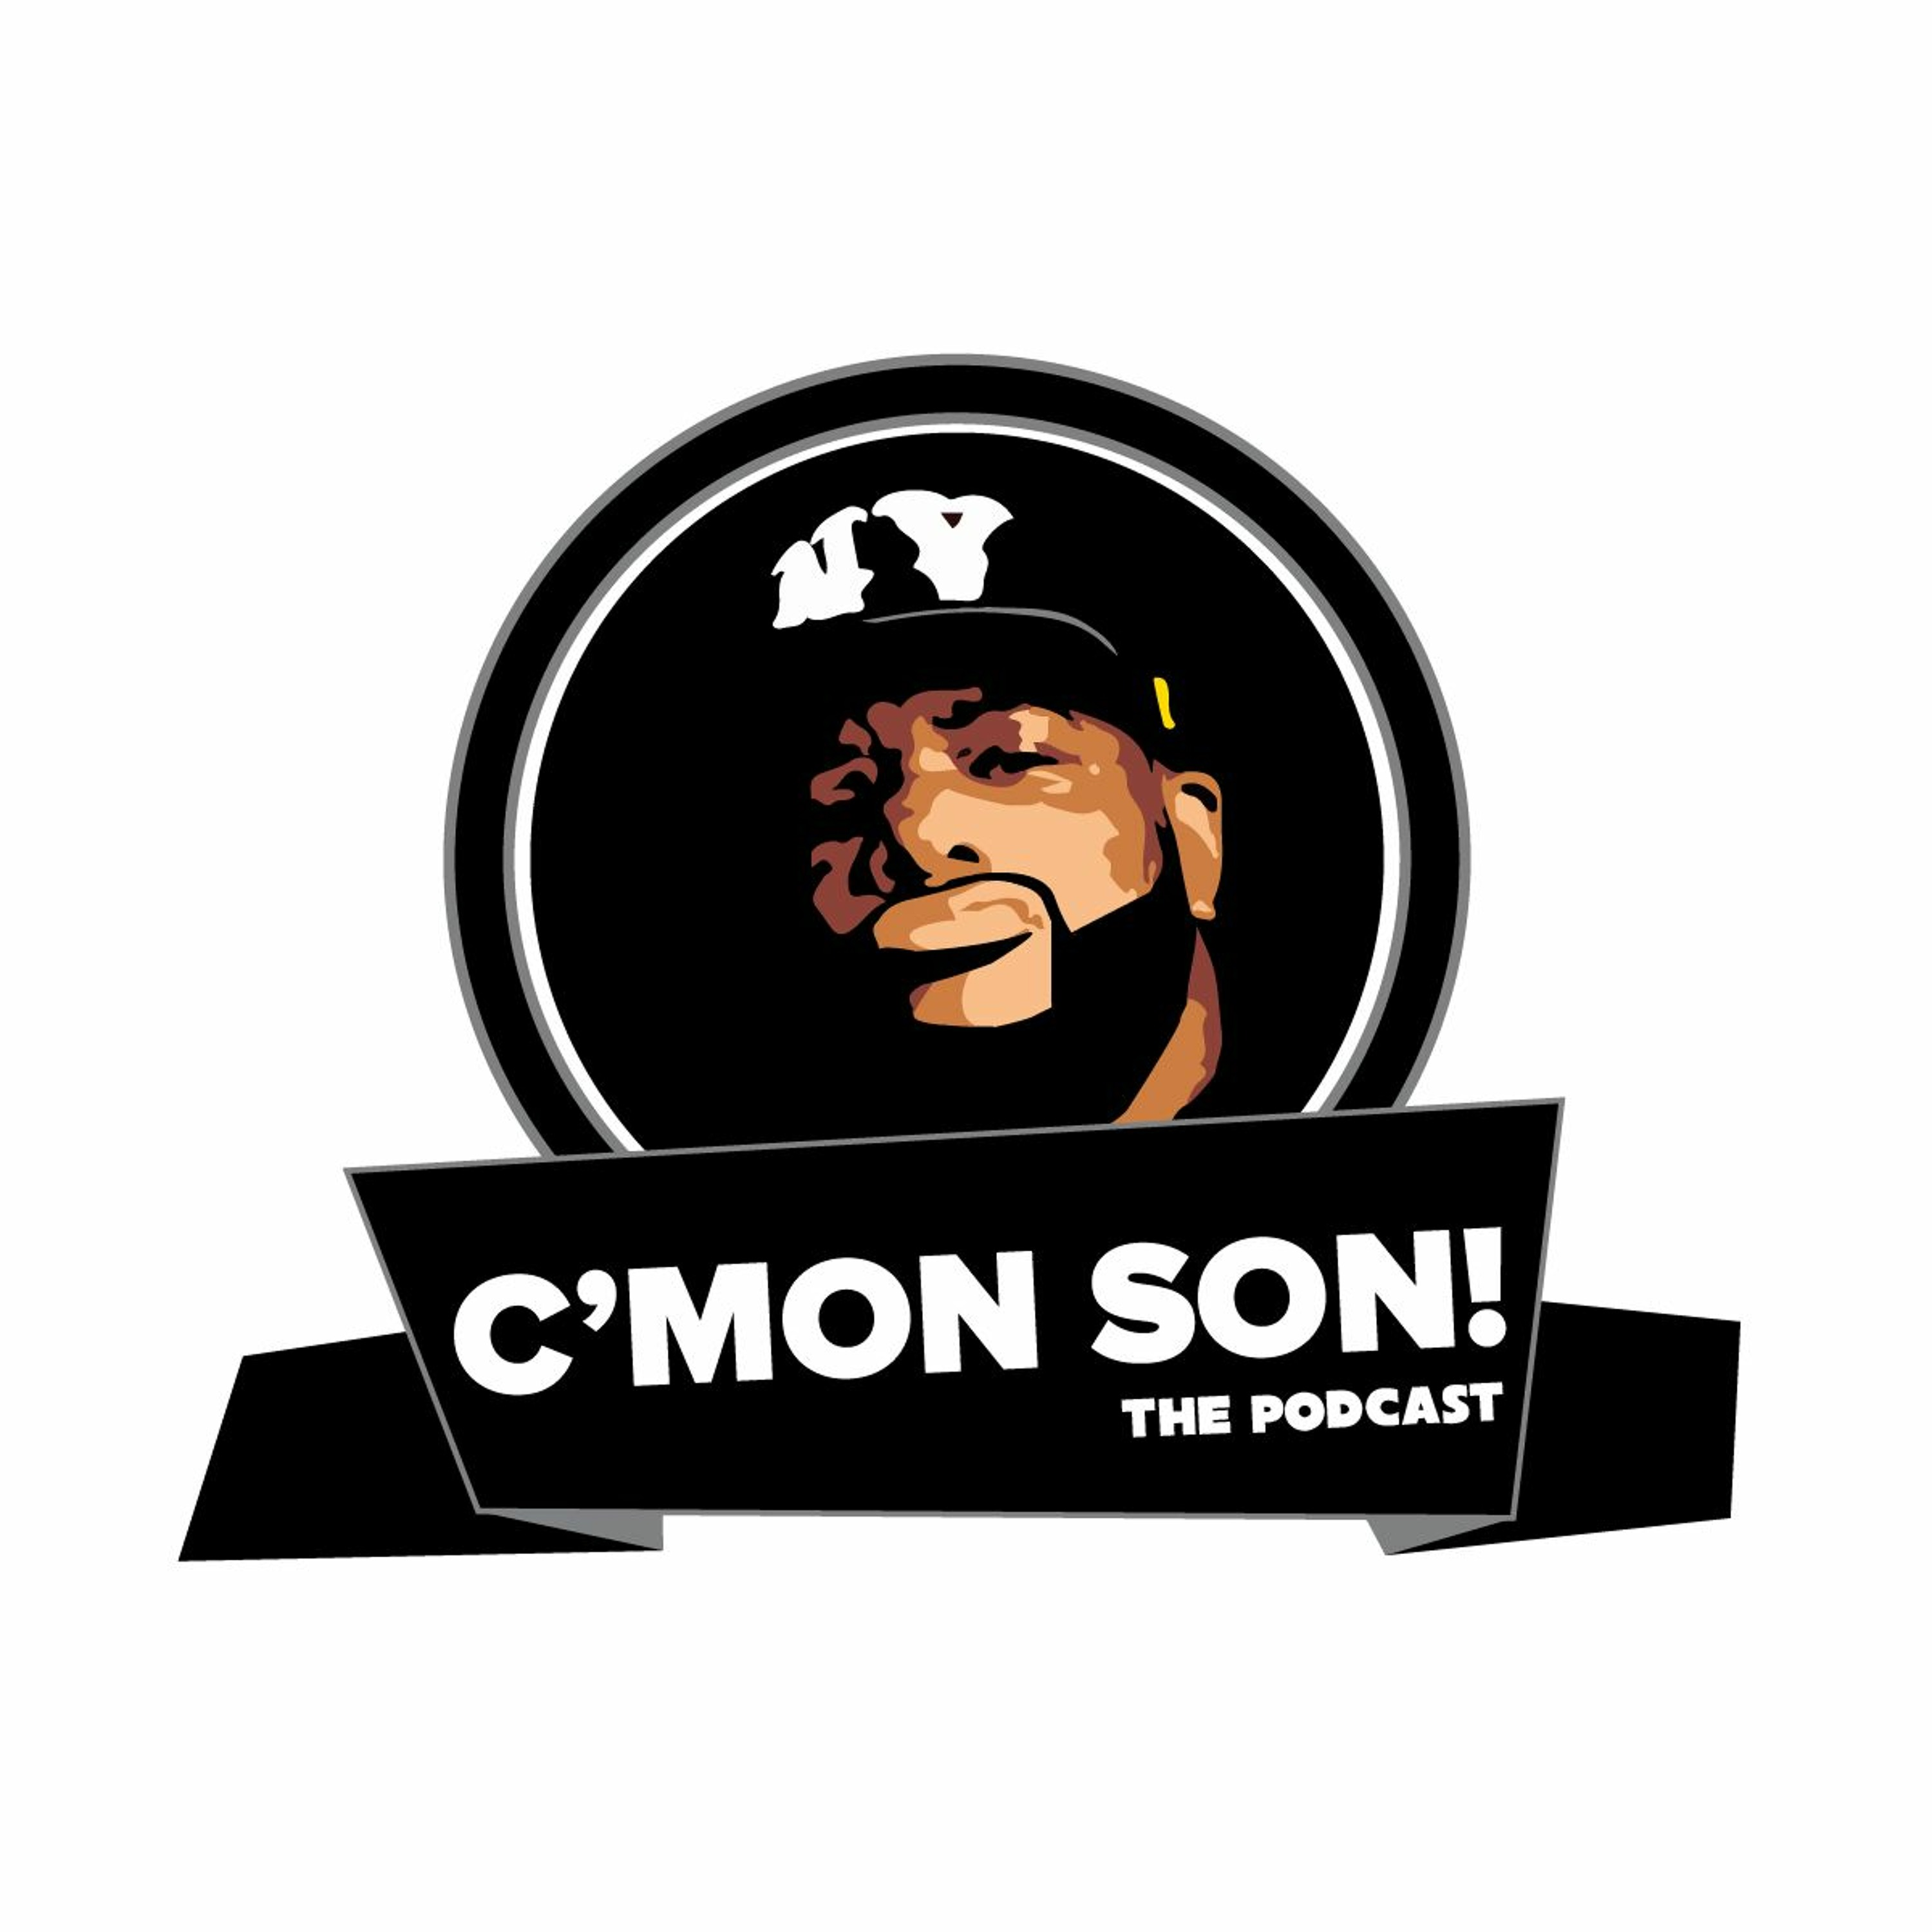 C'Mon Son! The Podcast Series #2 Episode #15: Ginuwine, with special guest host Monie Love